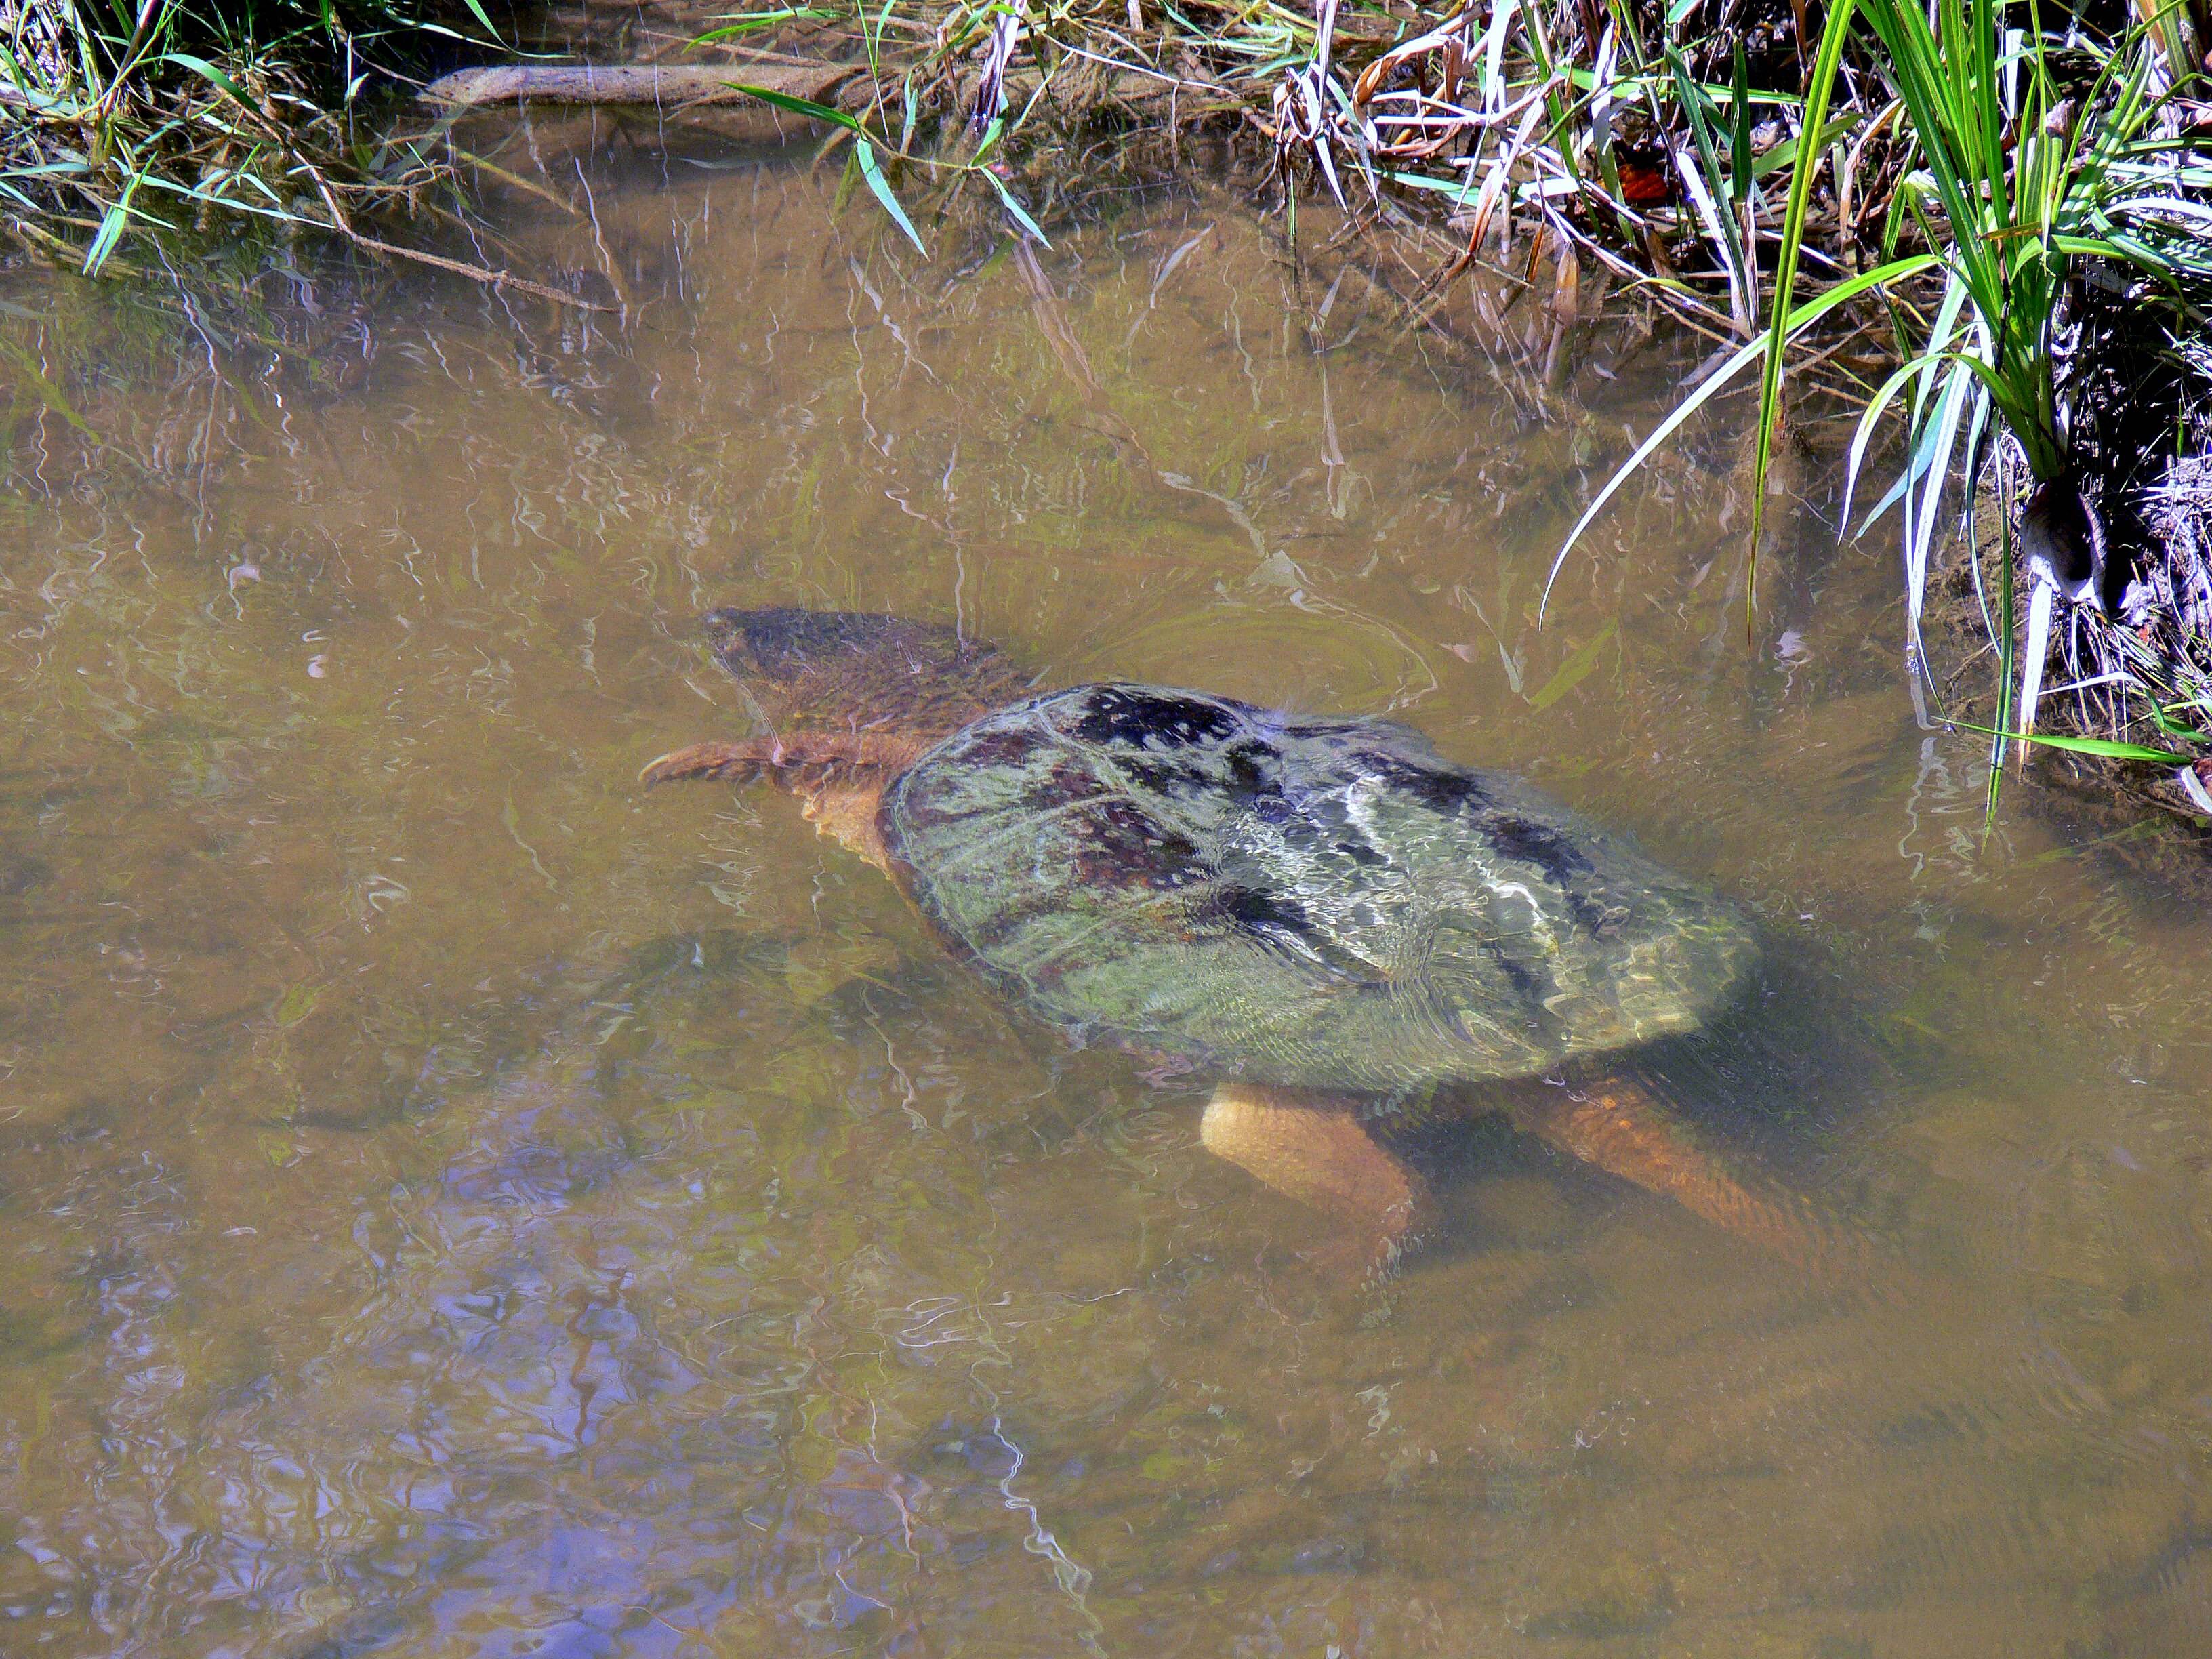 Turtle in the Humber River at Binder & Twine Park.